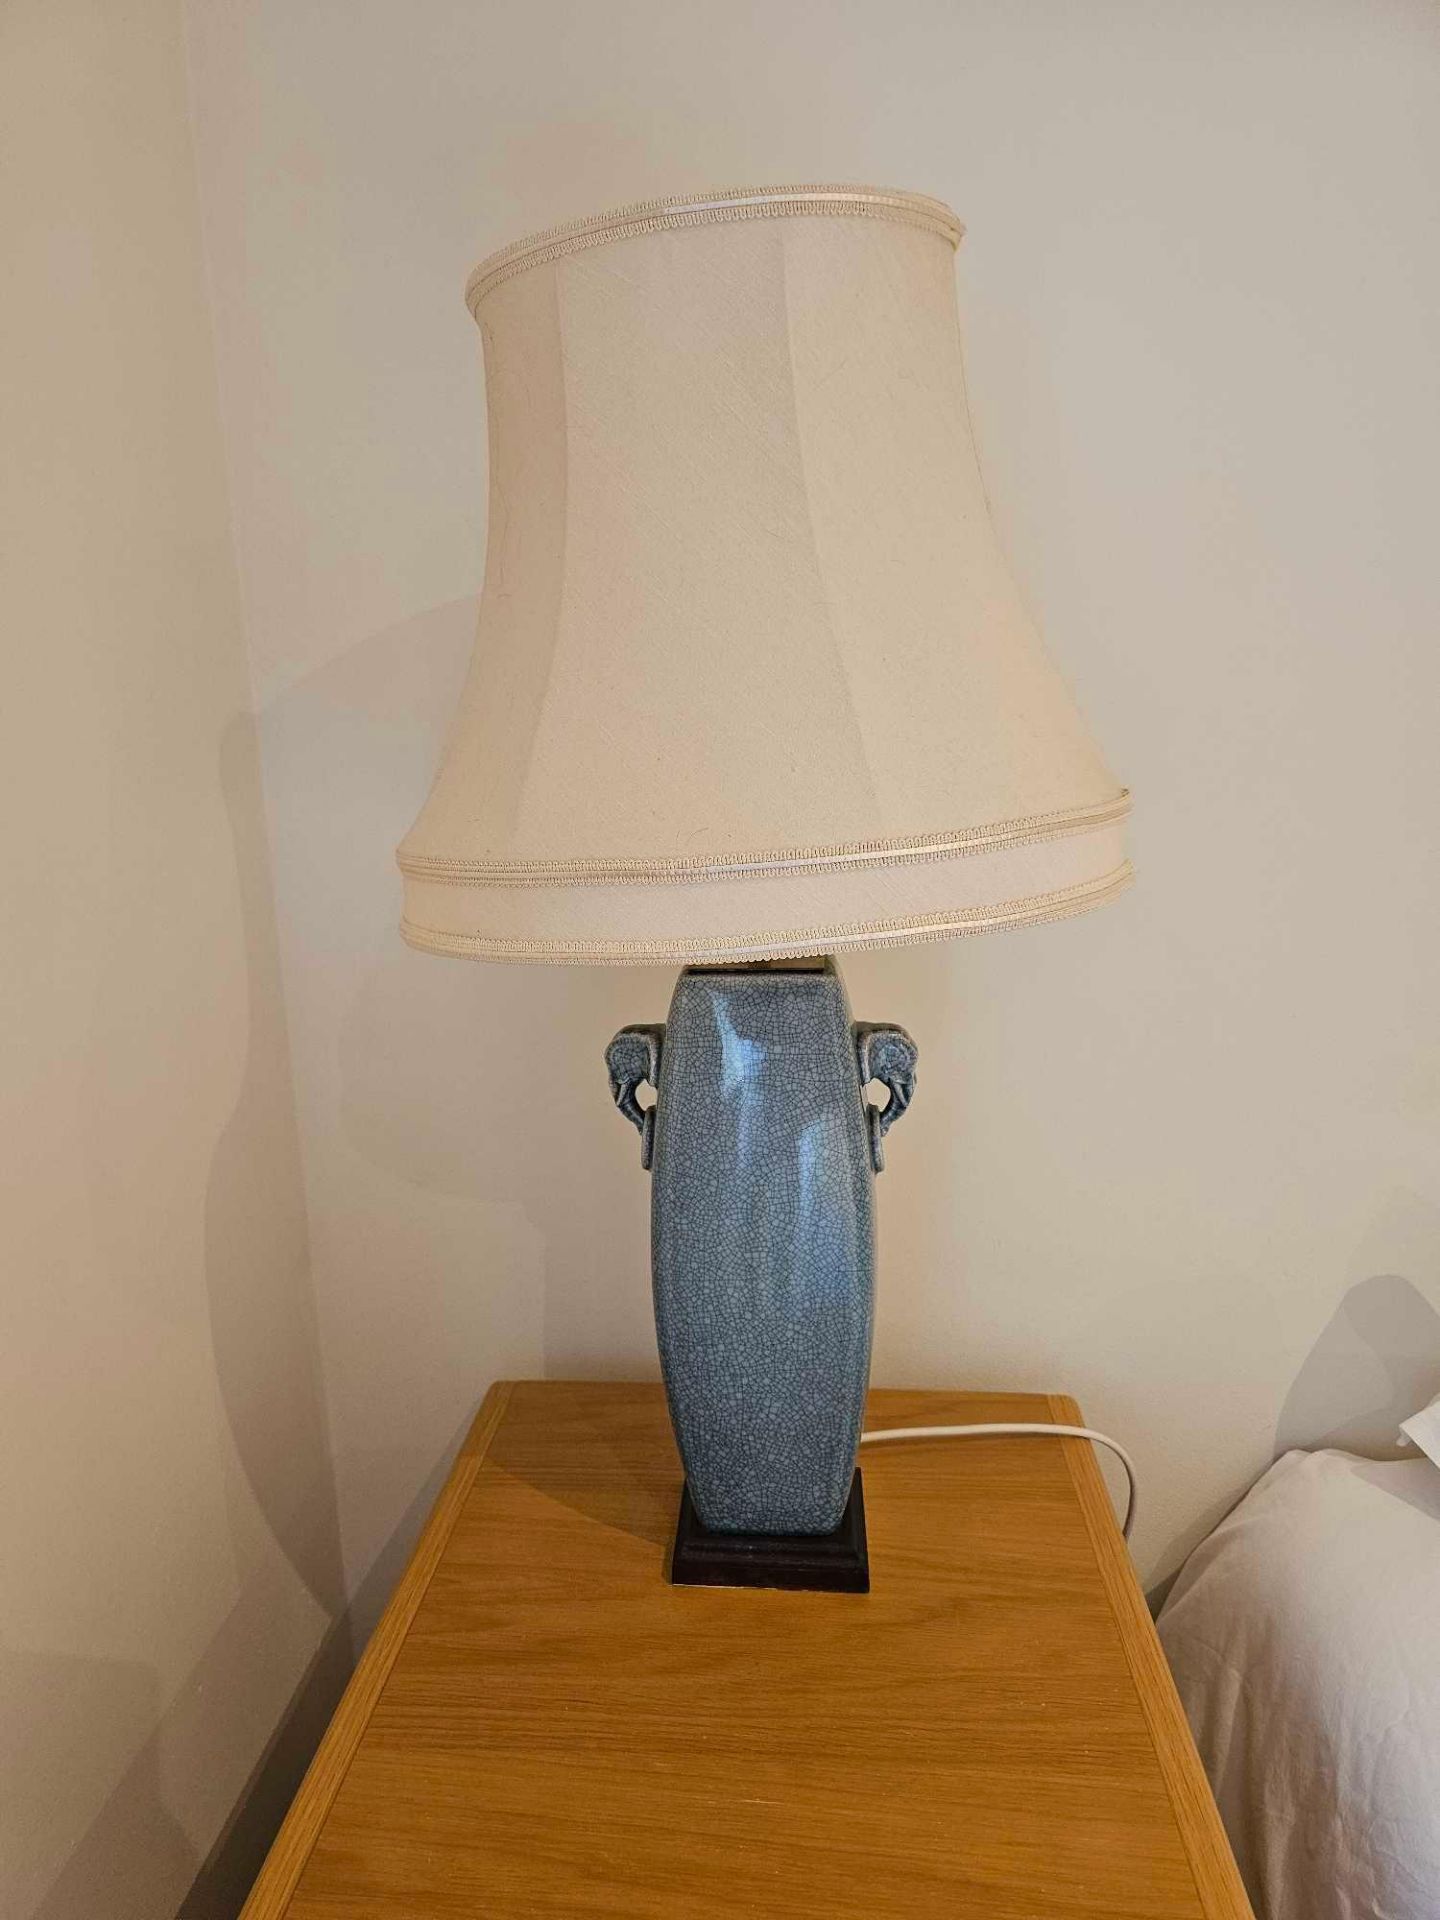 A Pair Of Ceramic Crackle Glazed Tall Table Lamps With Elephant Form Handles On Hardwood Base With